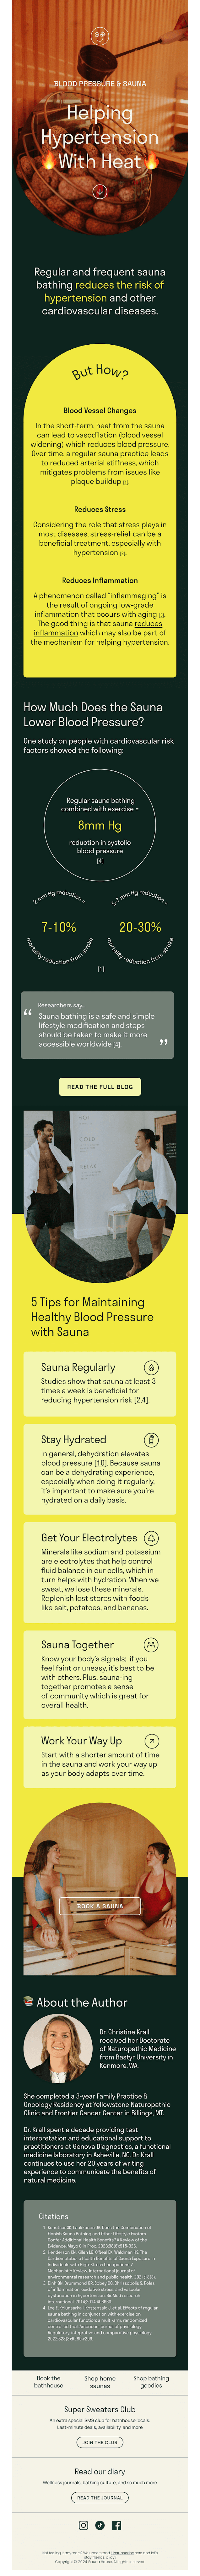 How the sauna can help with hypertension.